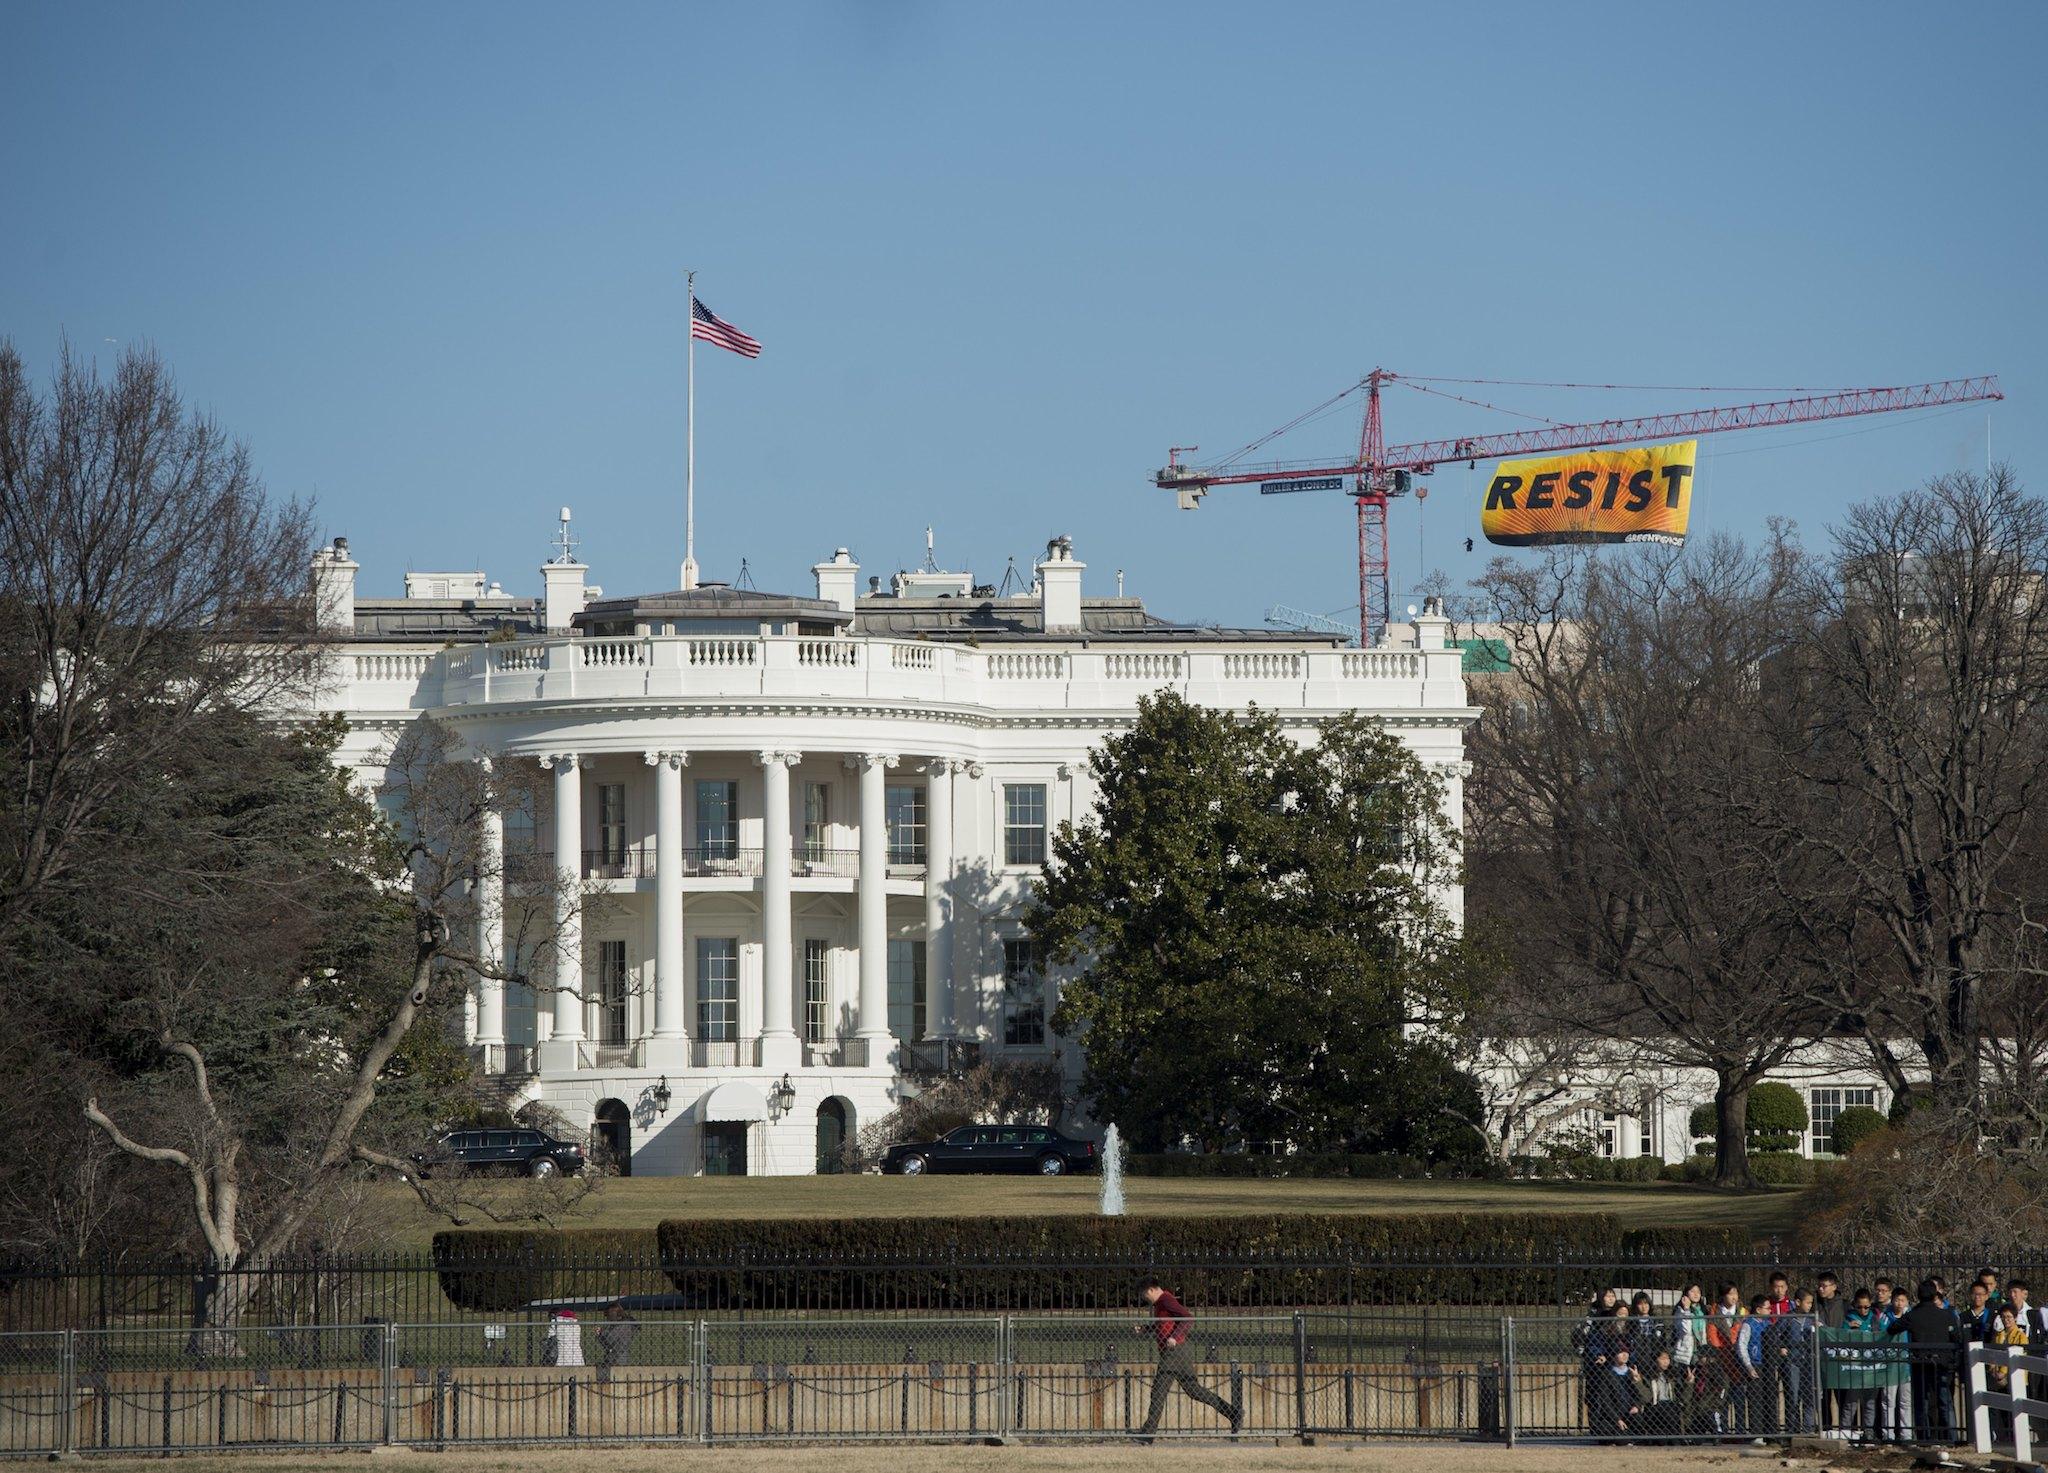 Greenpeace protesters unfold a banner reading 'Resist' from atop a construction crane behind the White House January 25, 2017 in Washington, DC